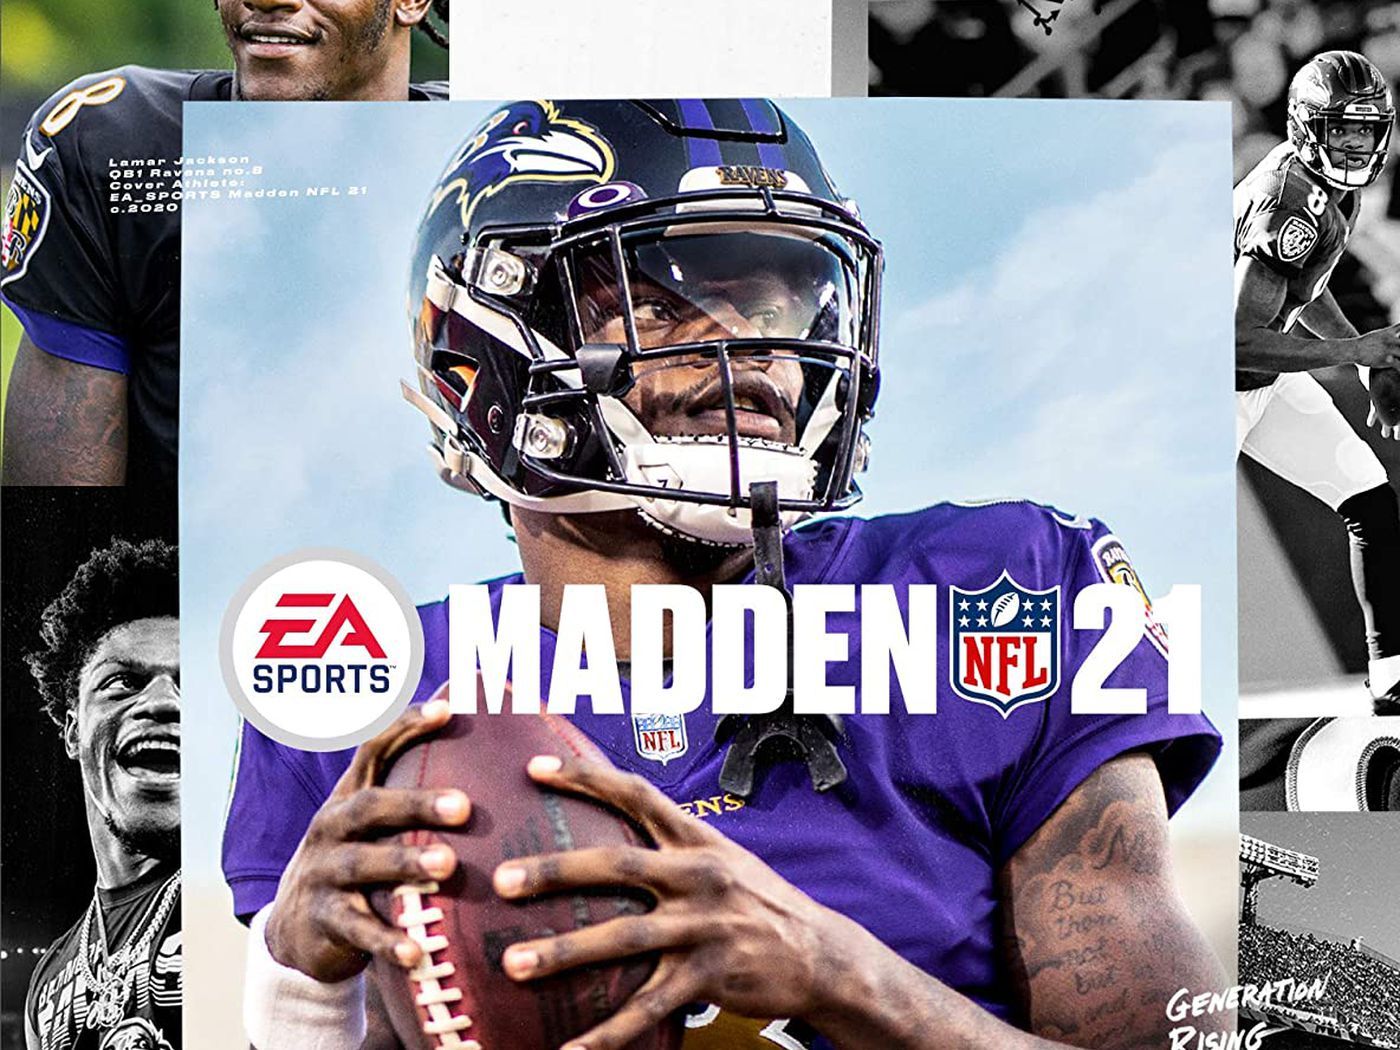 Here's Where You Can Pre Order Madden NFL 21!